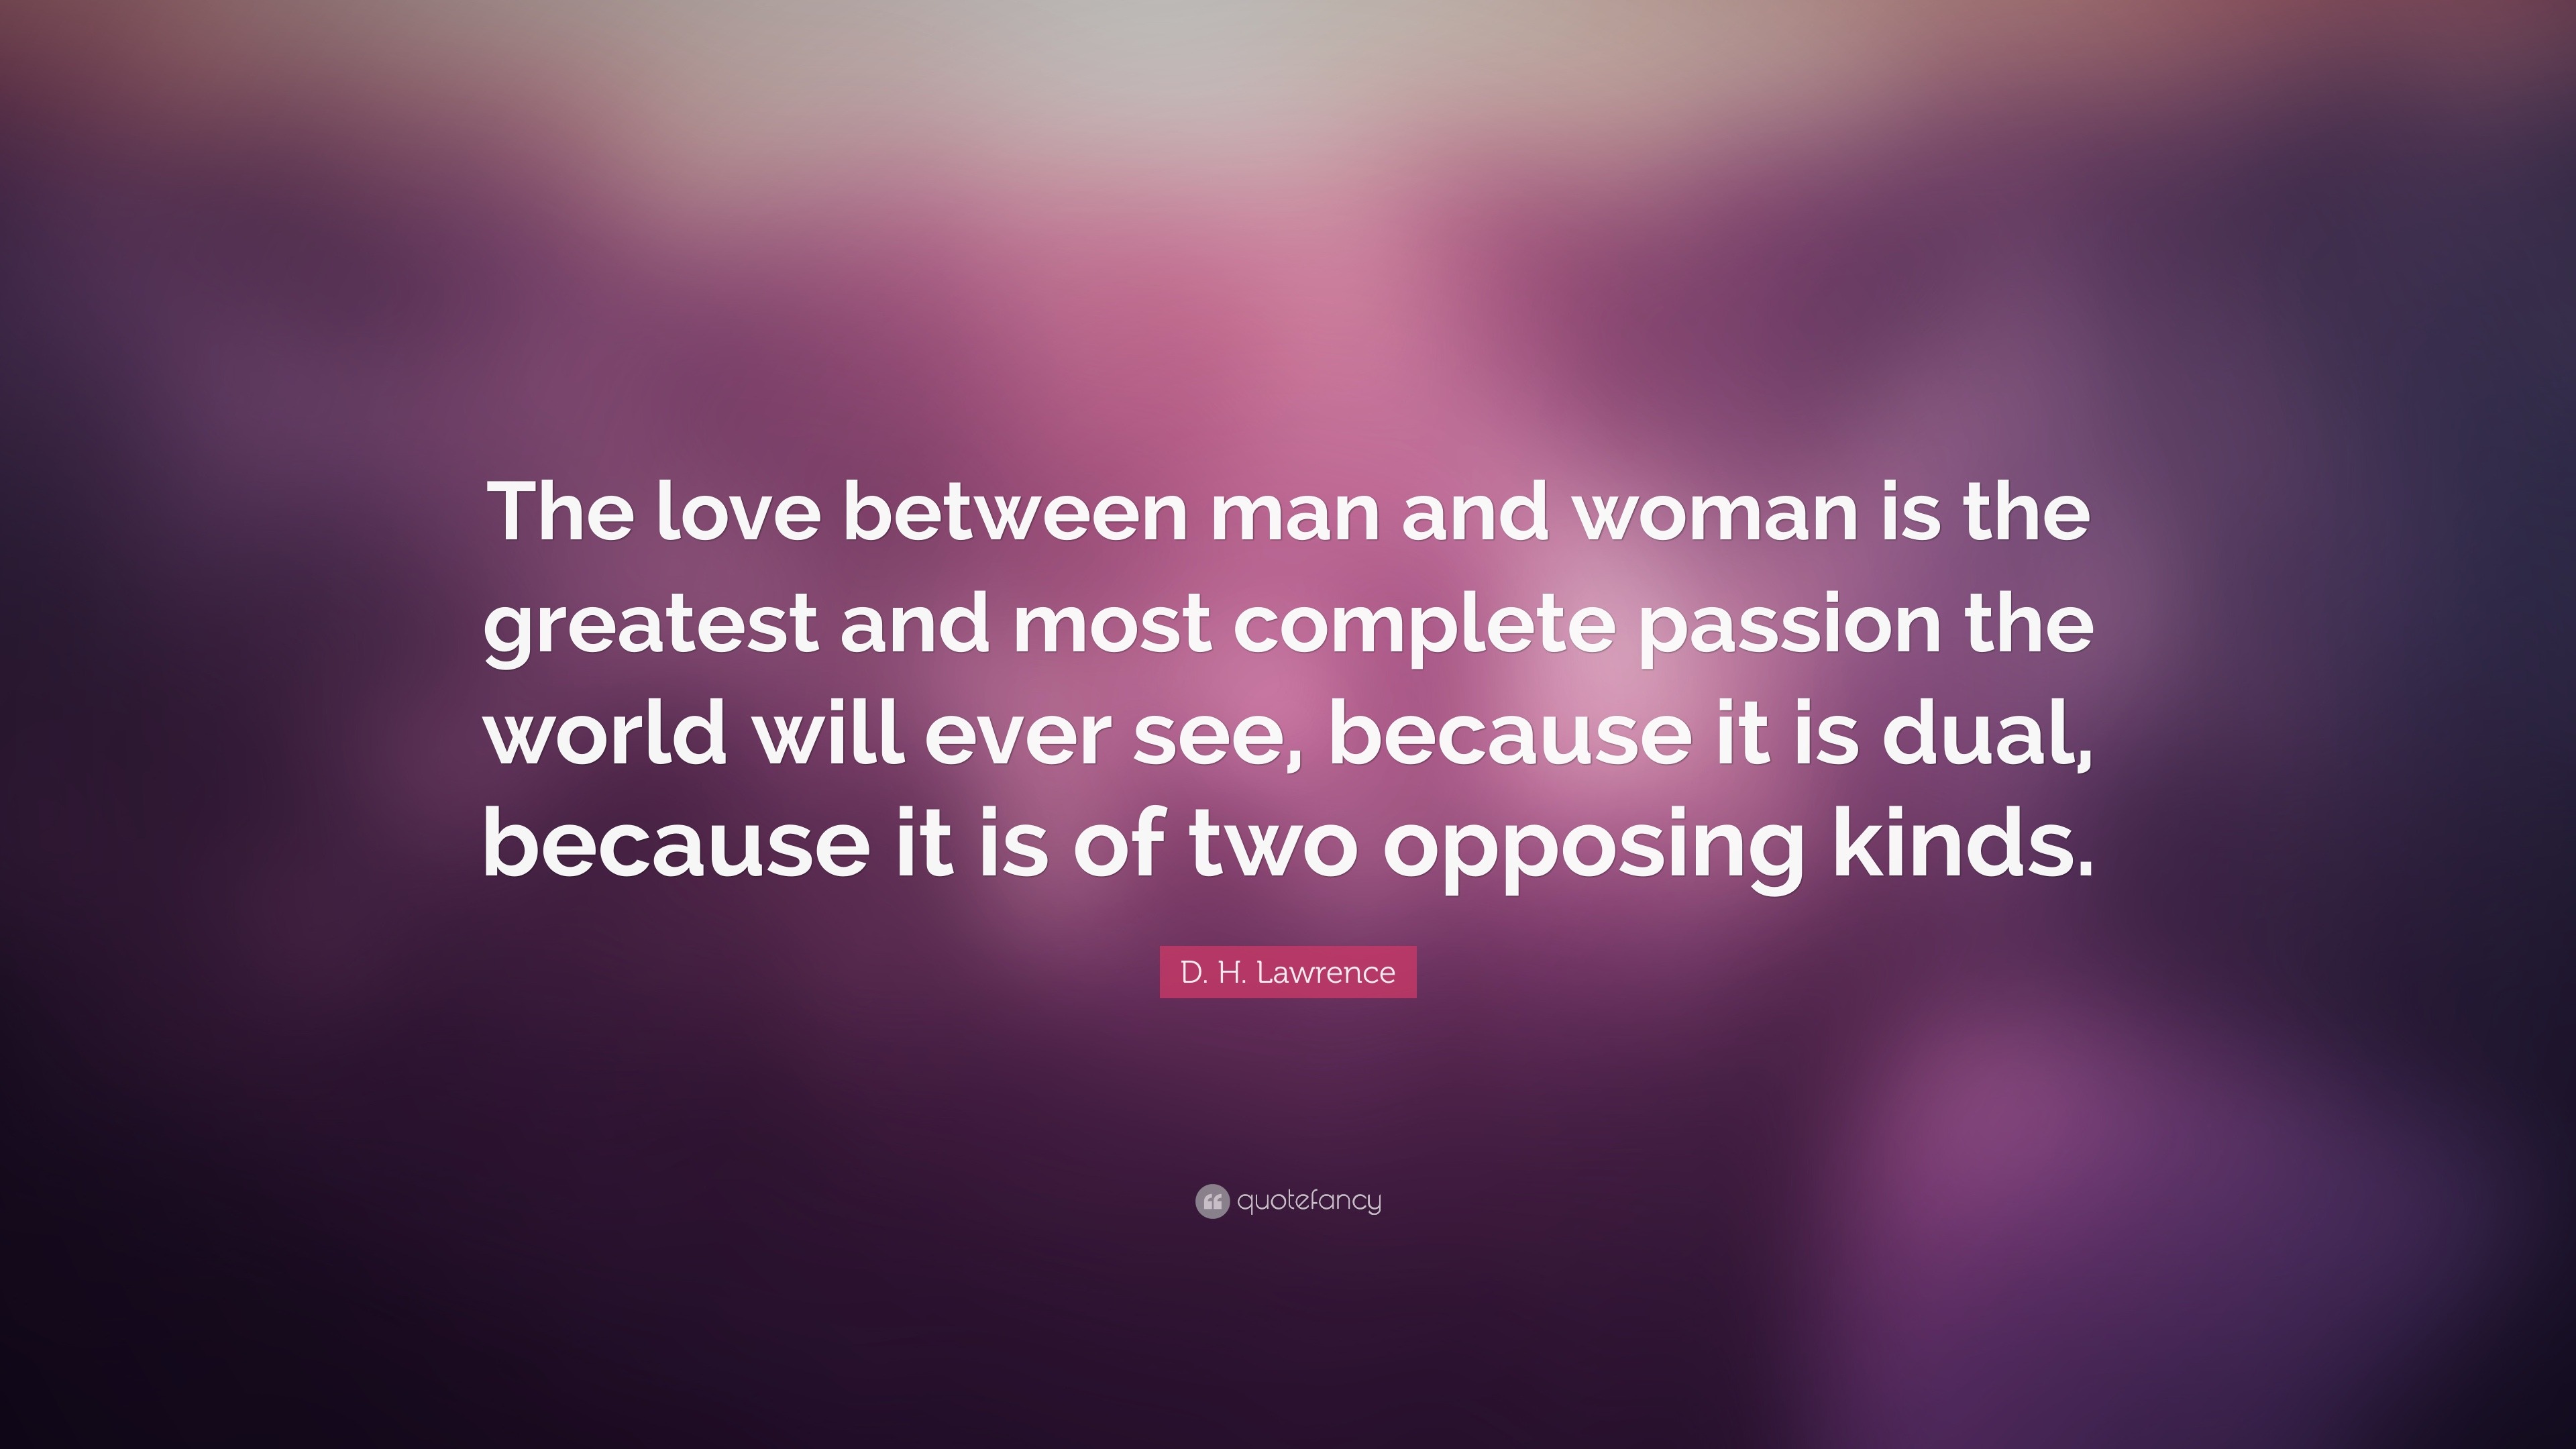 D H Lawrence Quote “the Love Between Man And Woman Is The Greatest And Most Complete Passion 3750